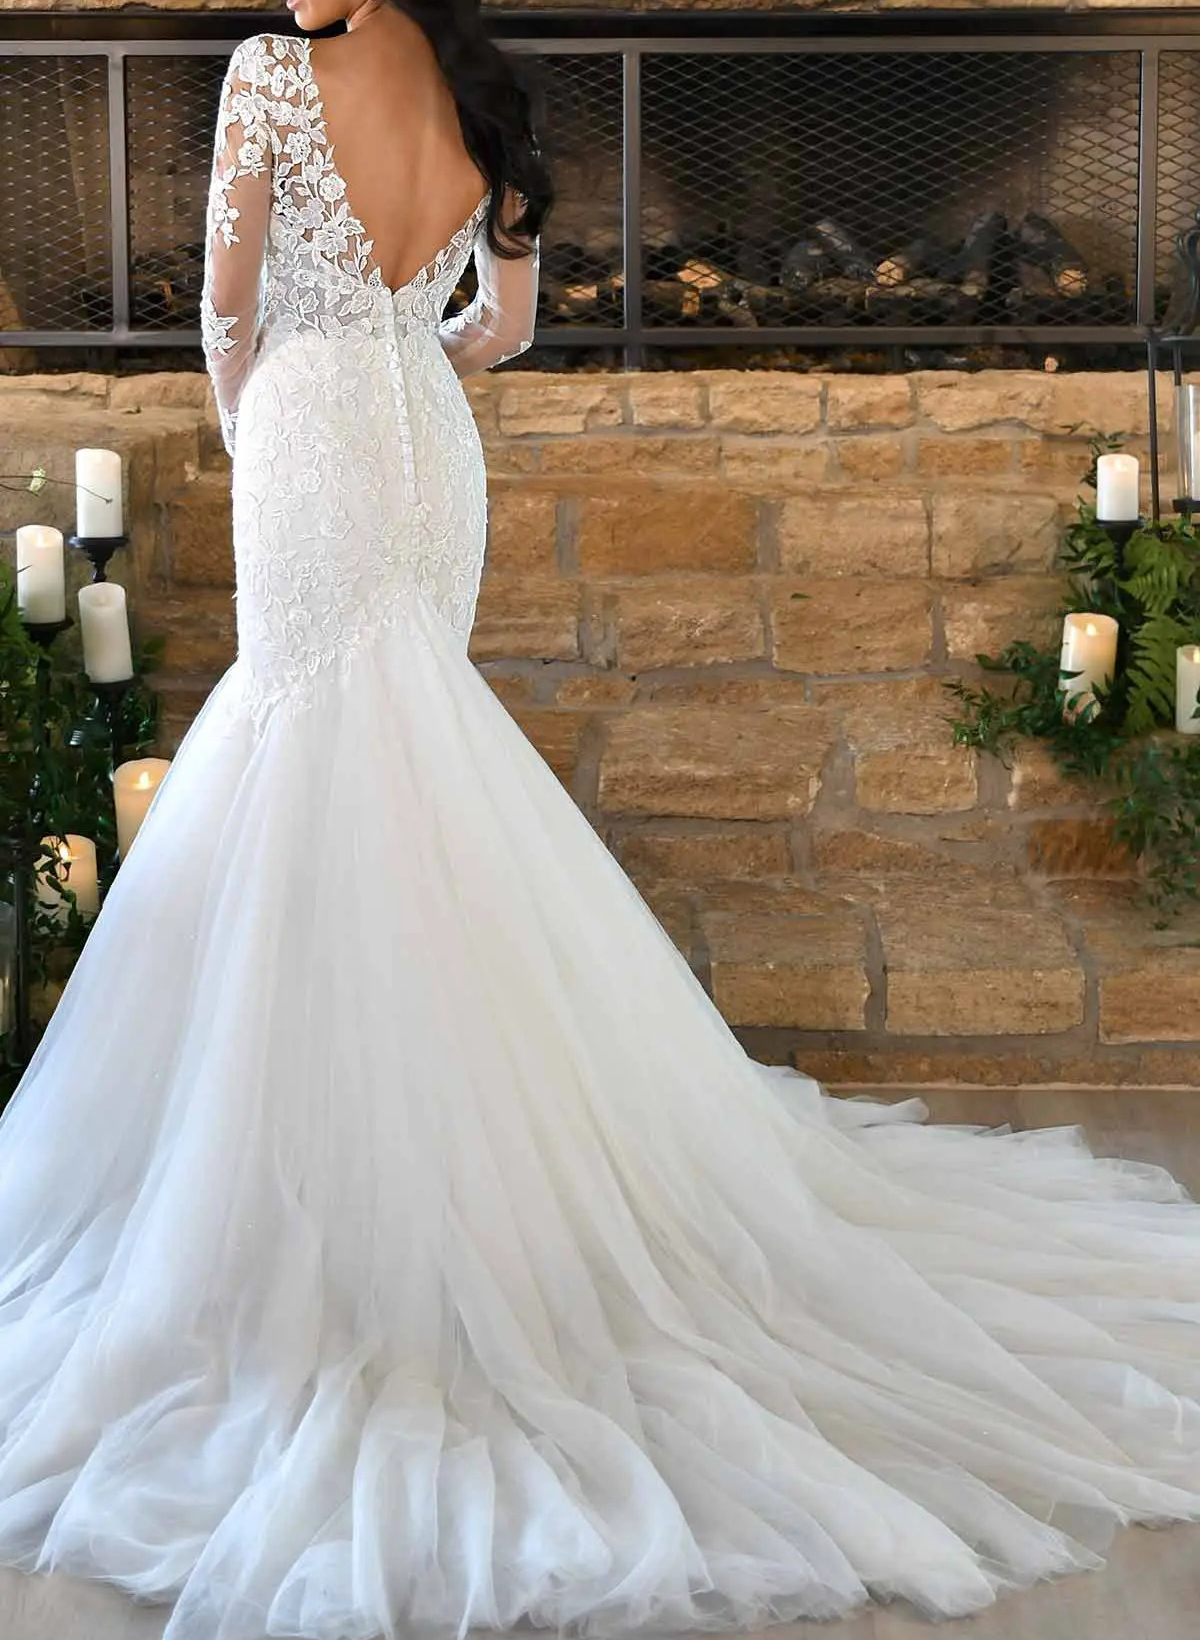 Classic Lace Long Sleeves Mermaid Wedding Dresses With Romantic Tulle